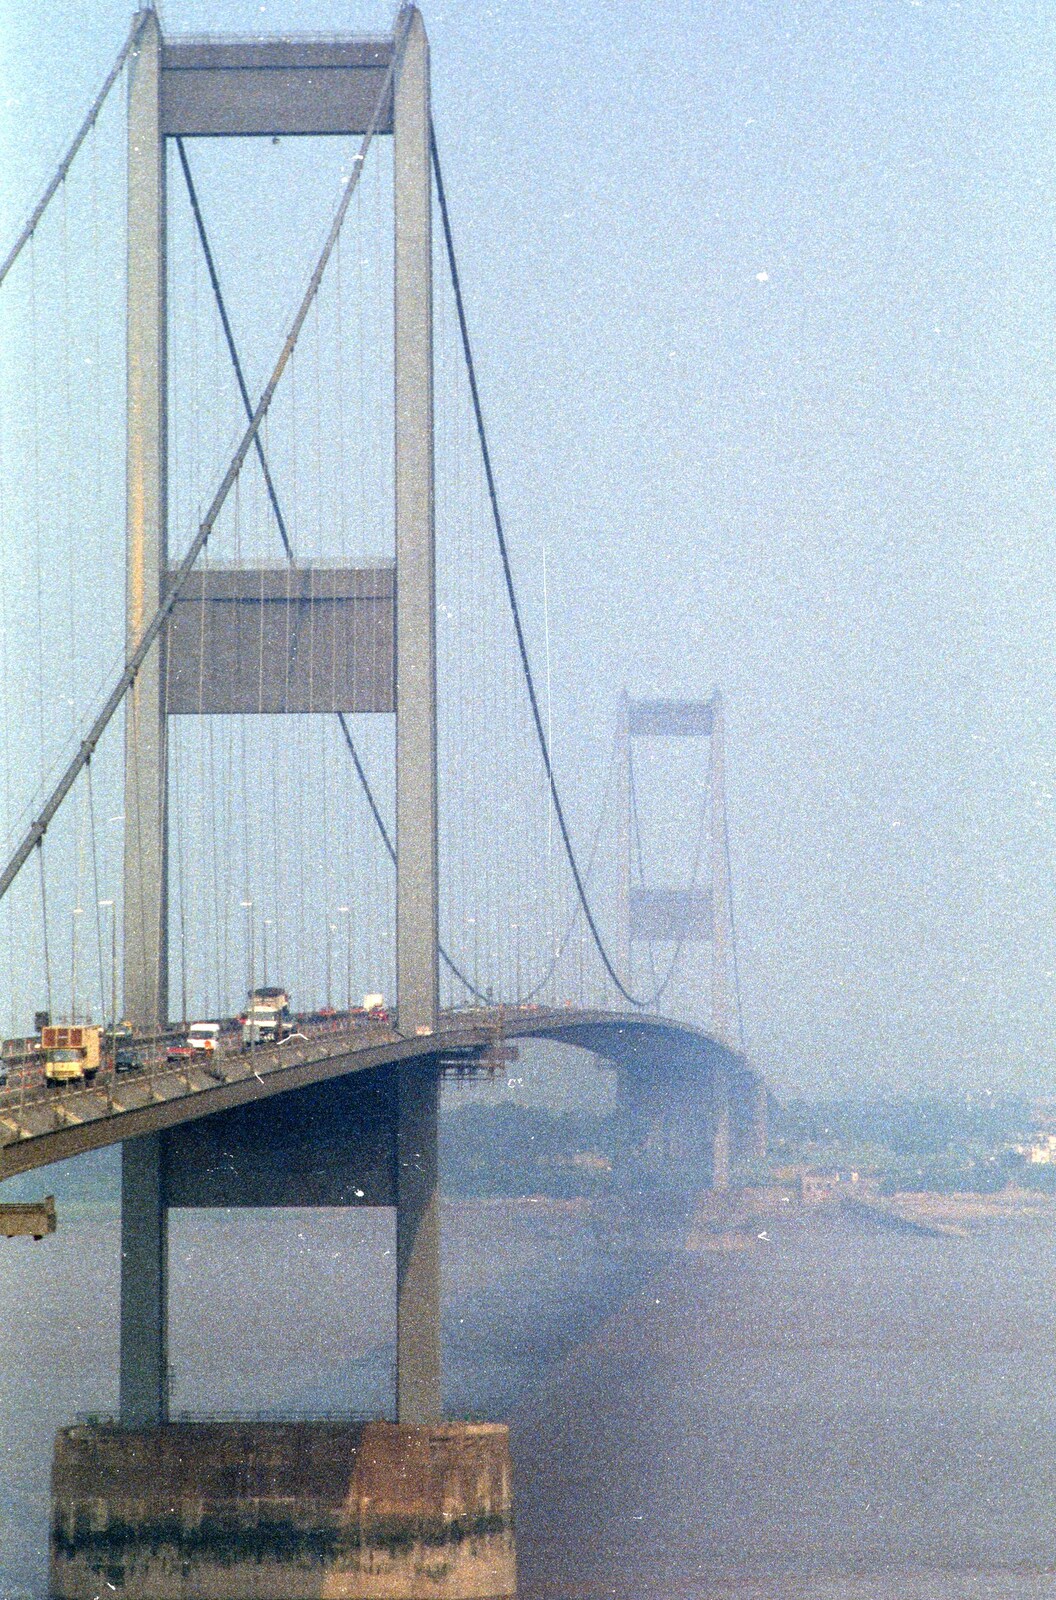 The Severn Bridge from A Trip to Chepstow, Monmouthshire, Wales - 5th July 1986